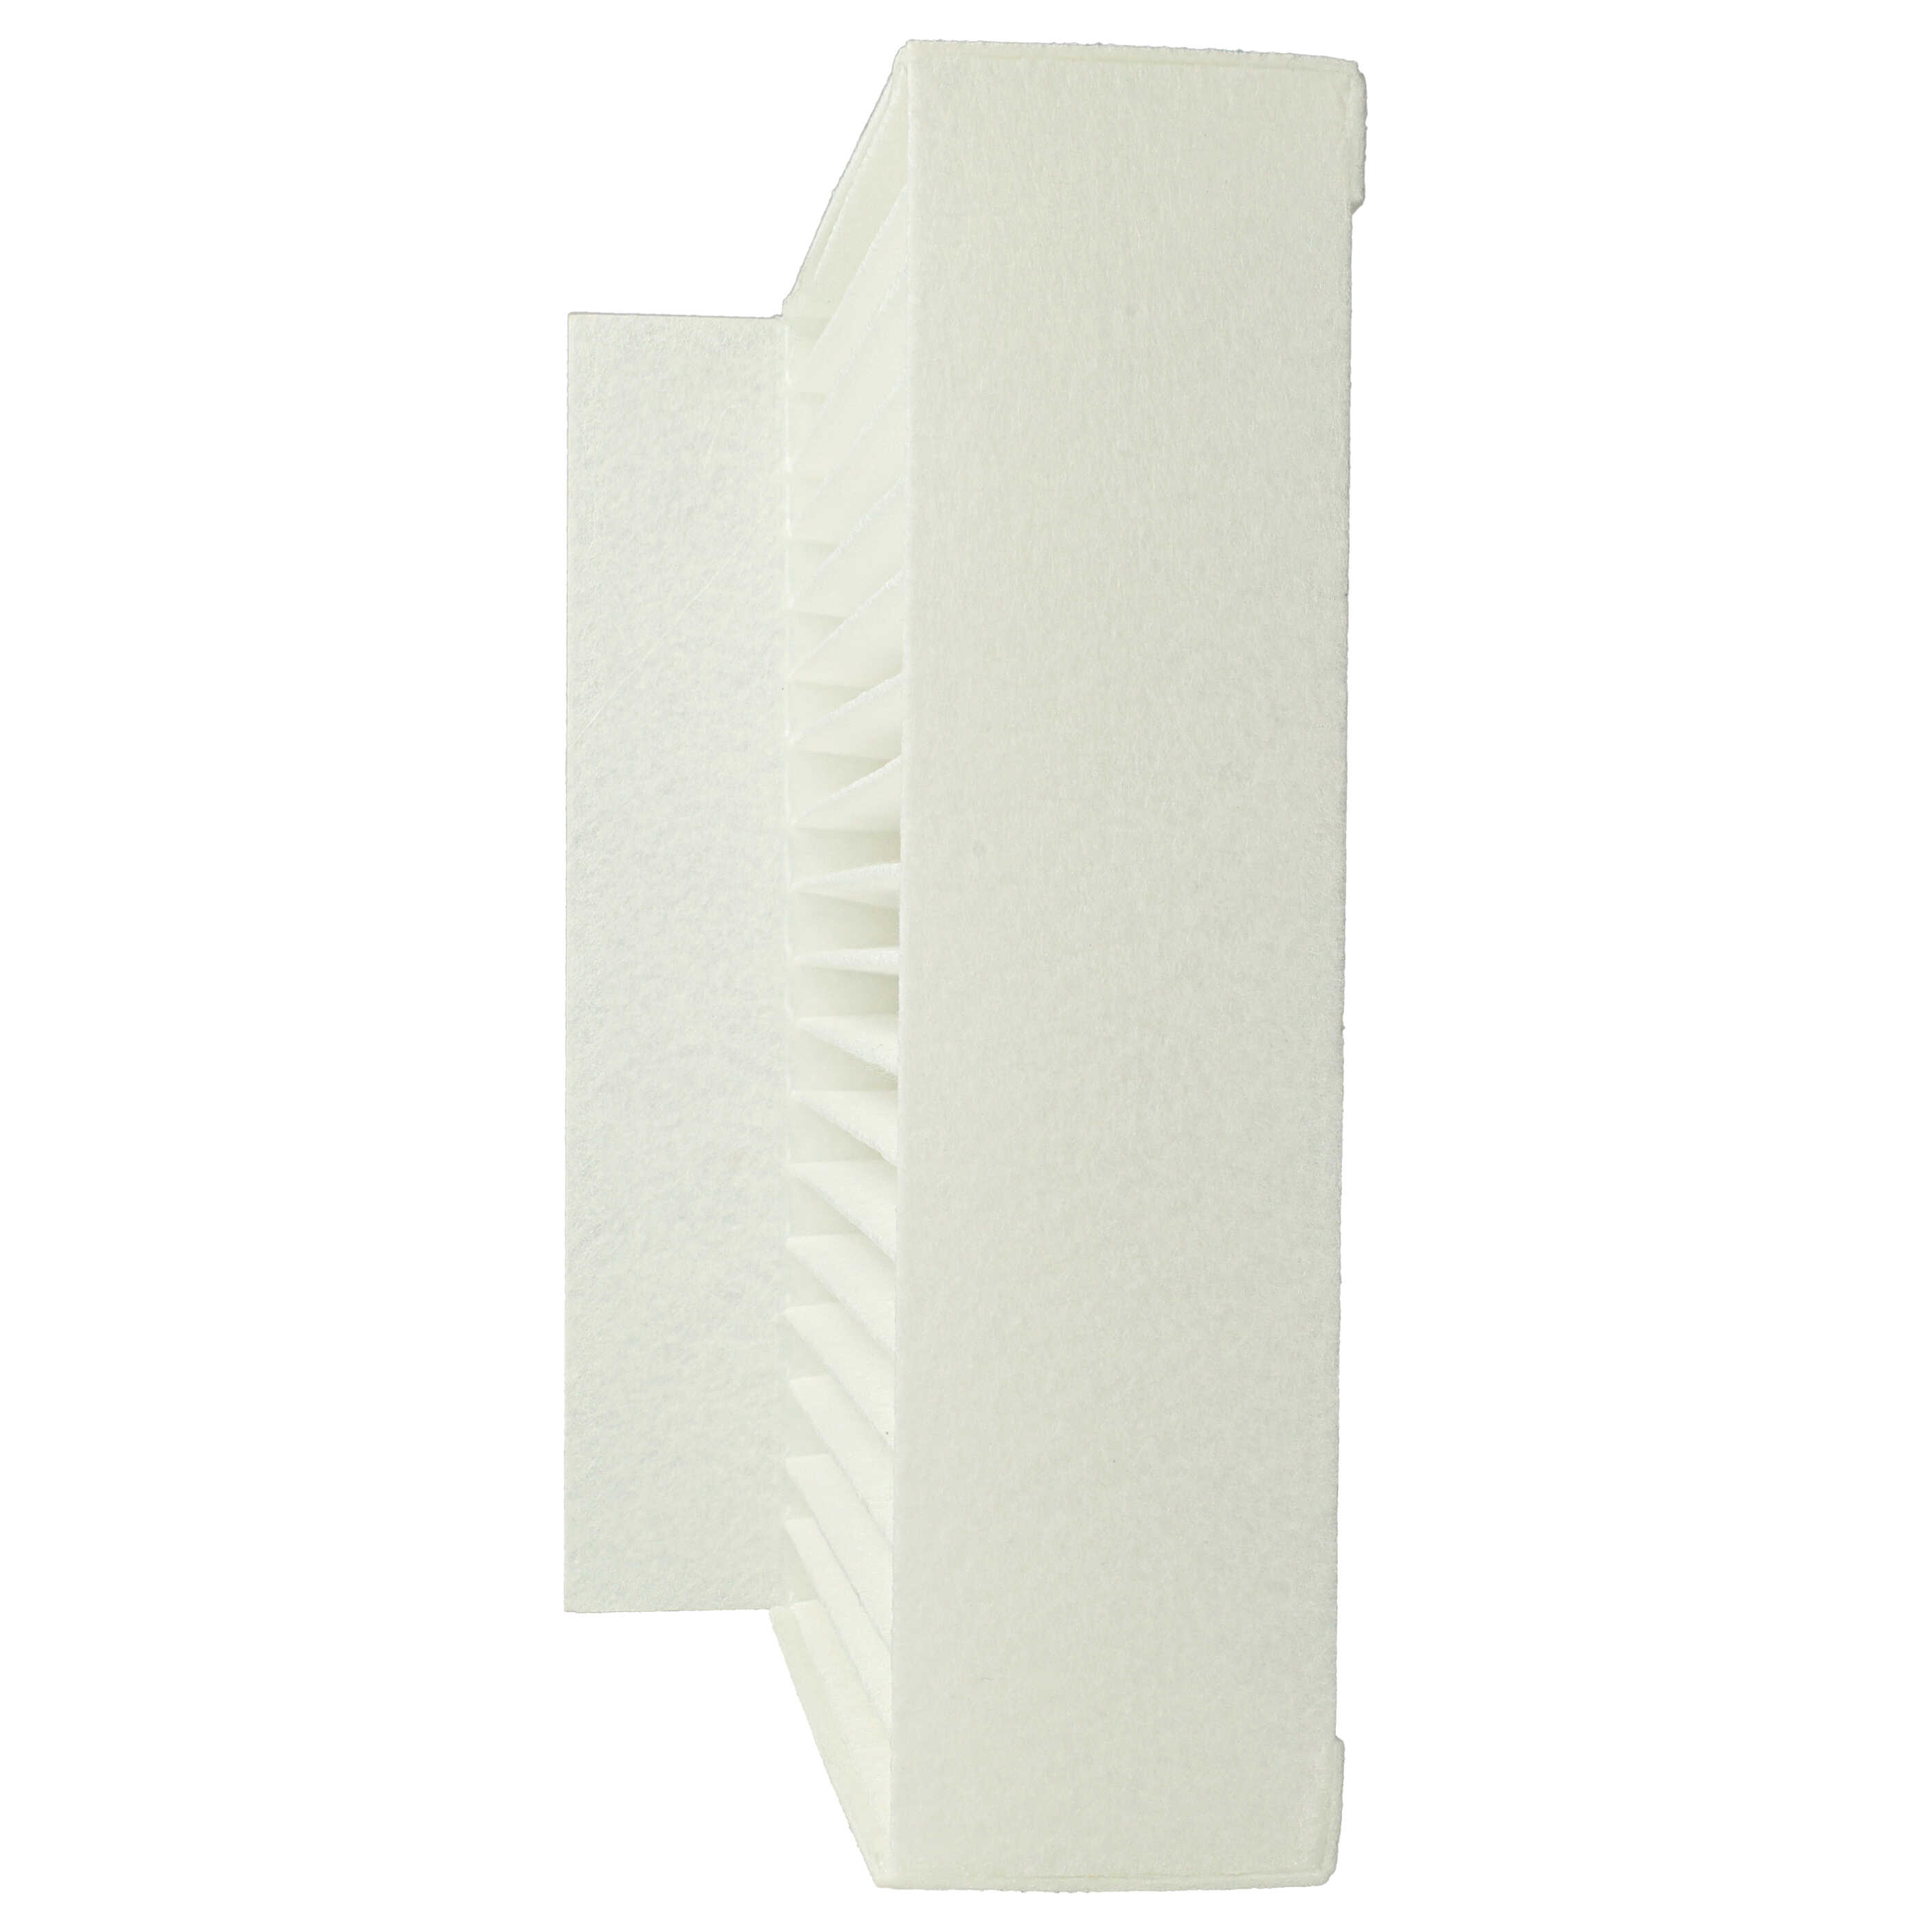 Air Filter Set Replacement for Zehnder 527004280, 521 012 720 for Ventilation Devices - M5 / F7